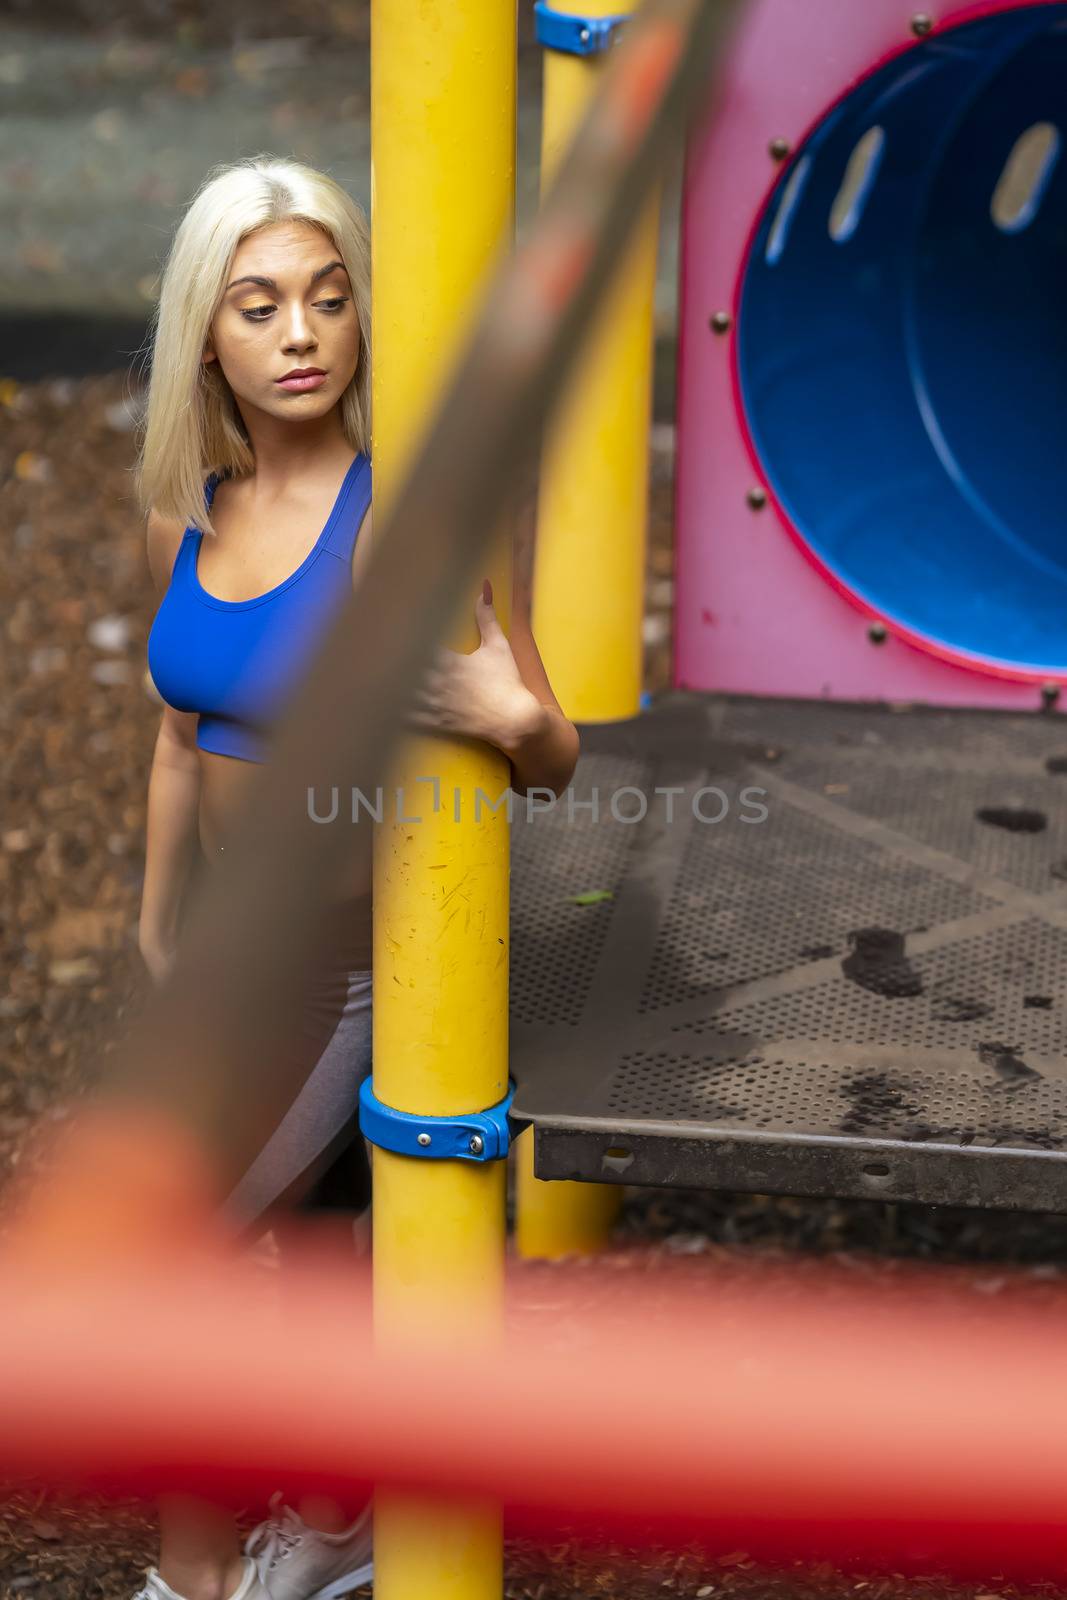 A Young Lovely Blonde Model Works Out Outdoors While Enjoying A Summers Day by actionsports